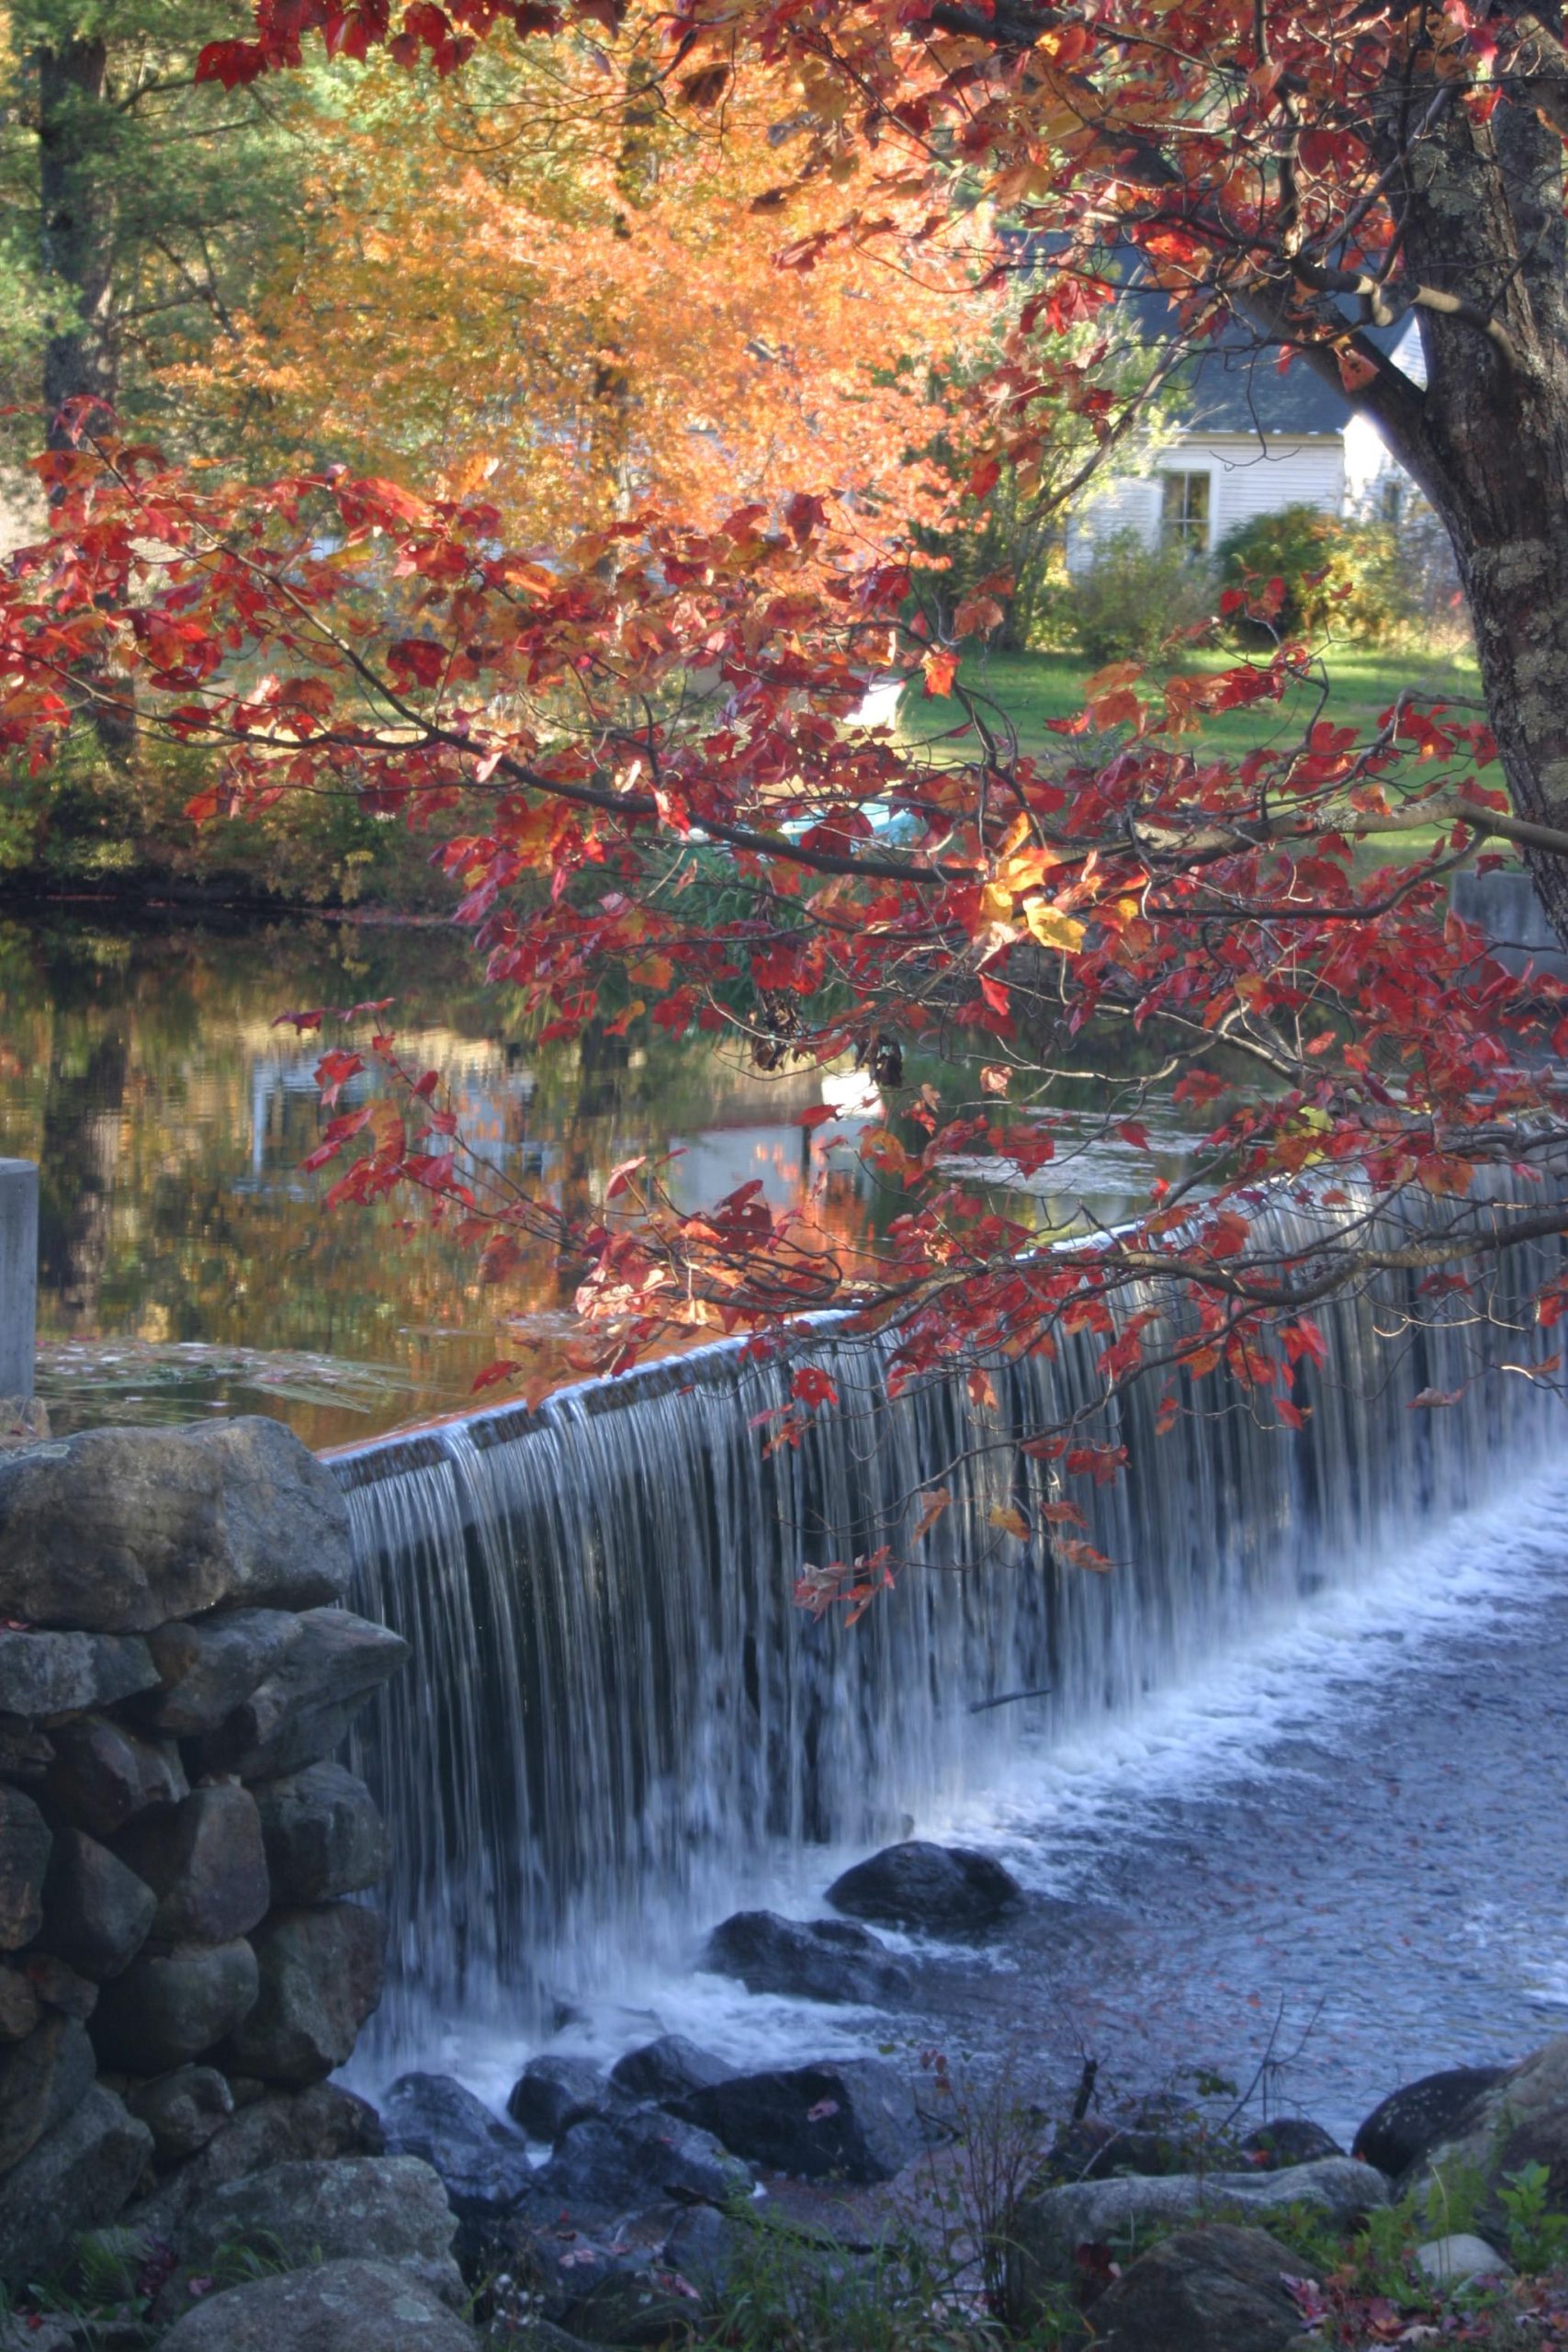 Waterfall in Autumn (user submitted)